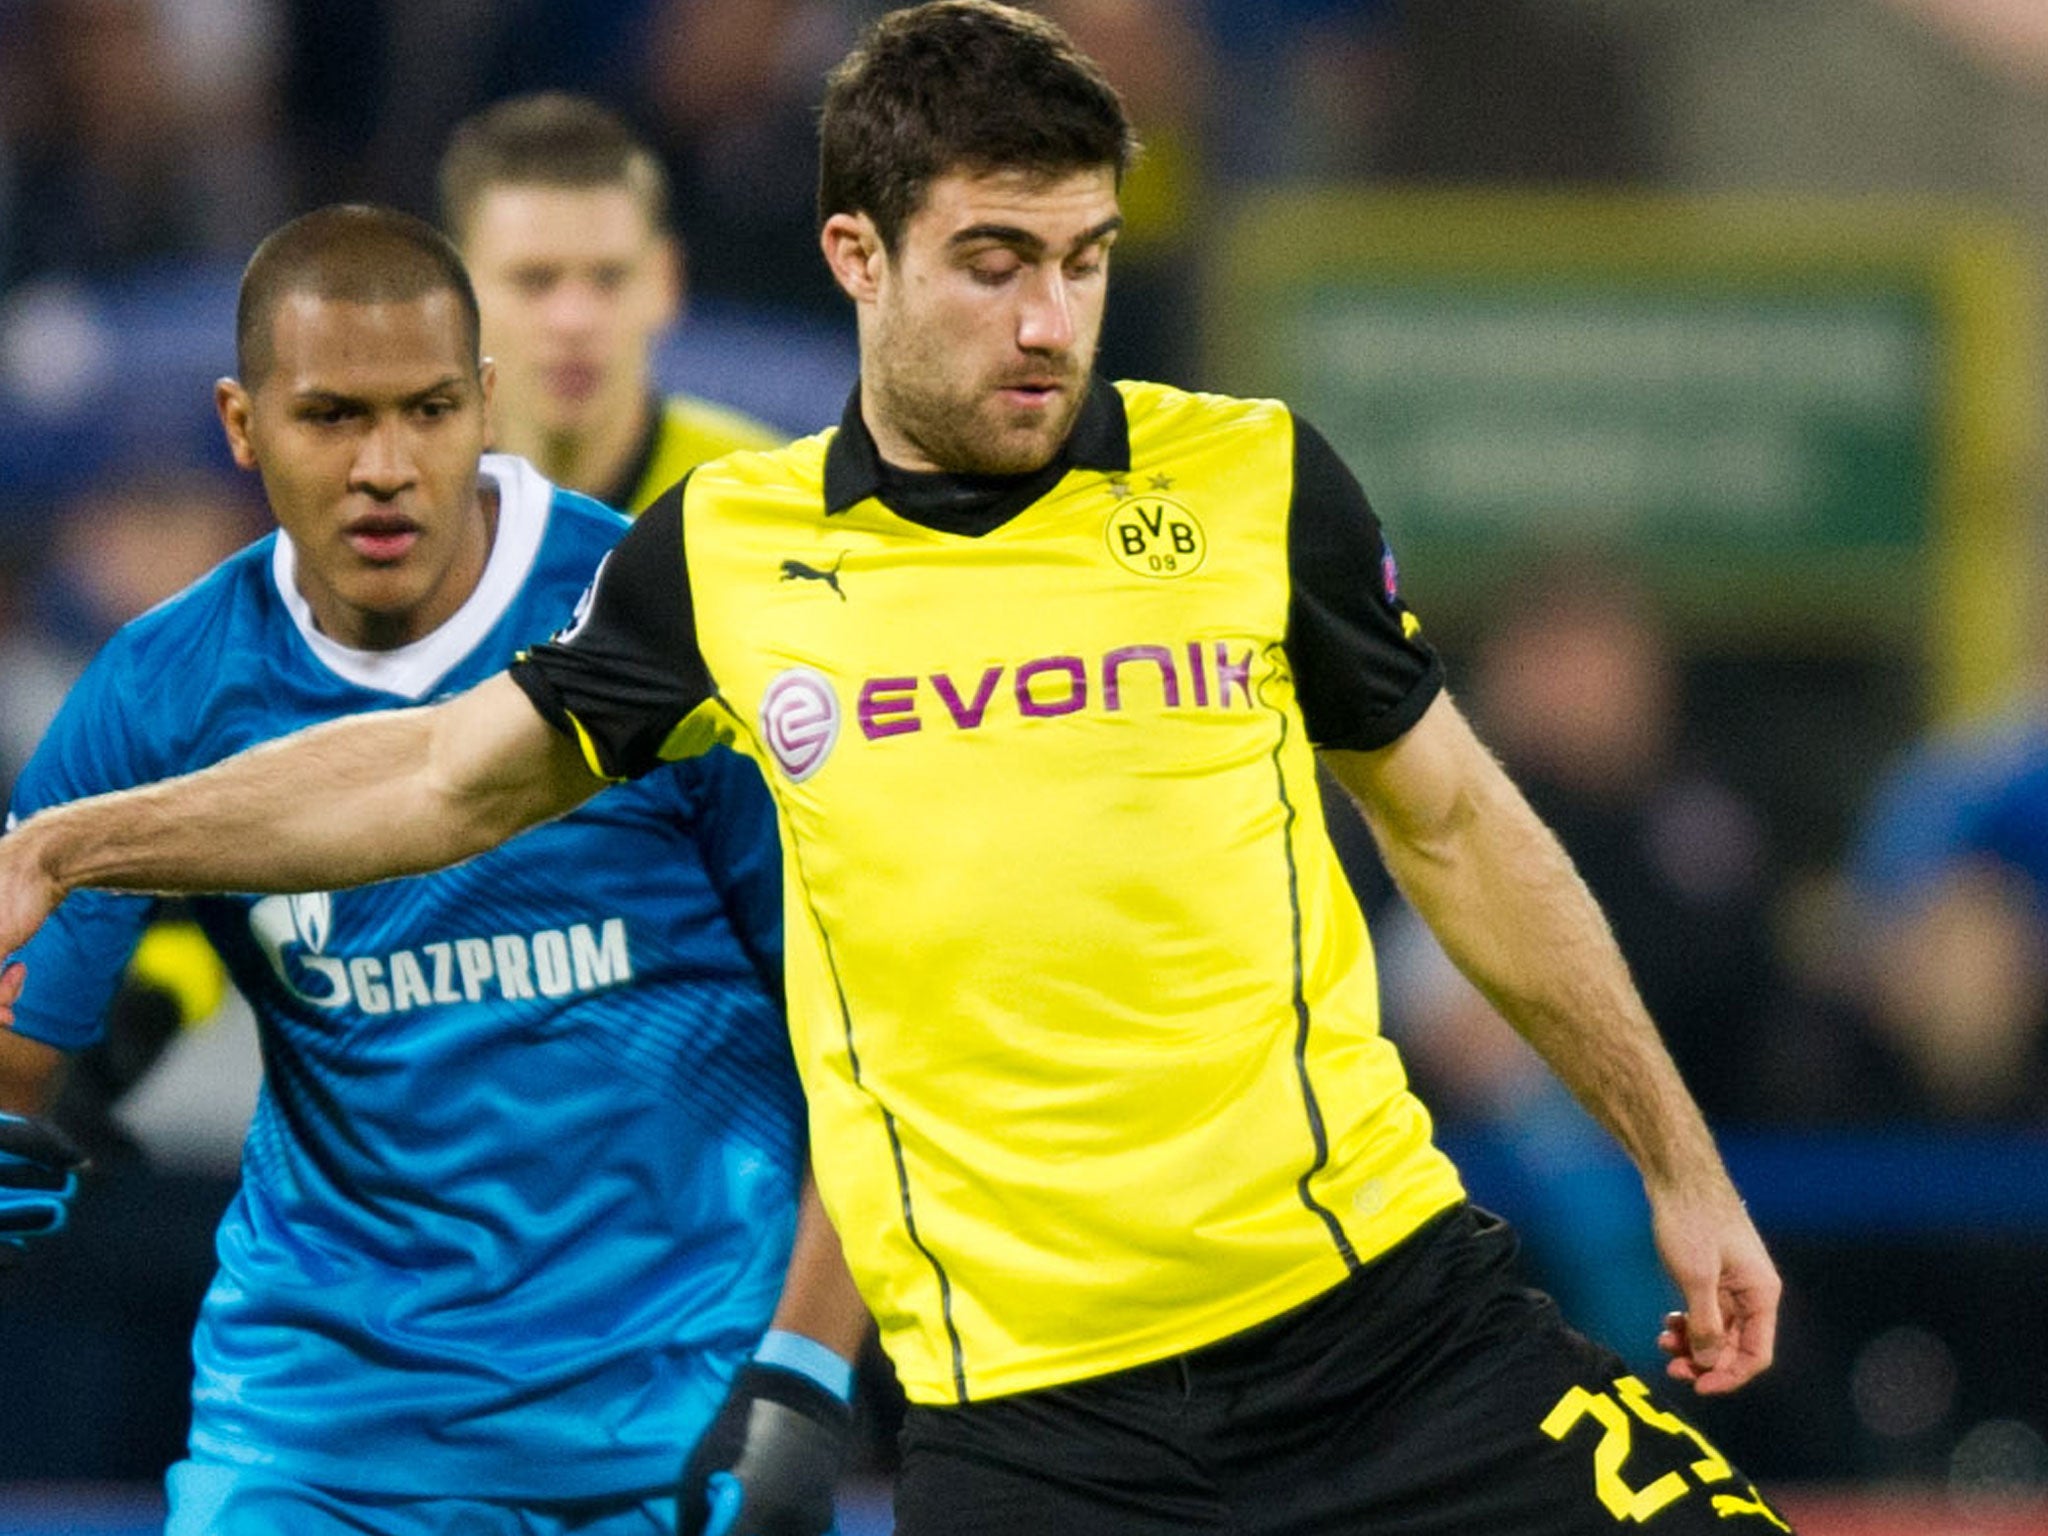 Sokratis Papastathopoulos (right) in action for Borussia Dortmund